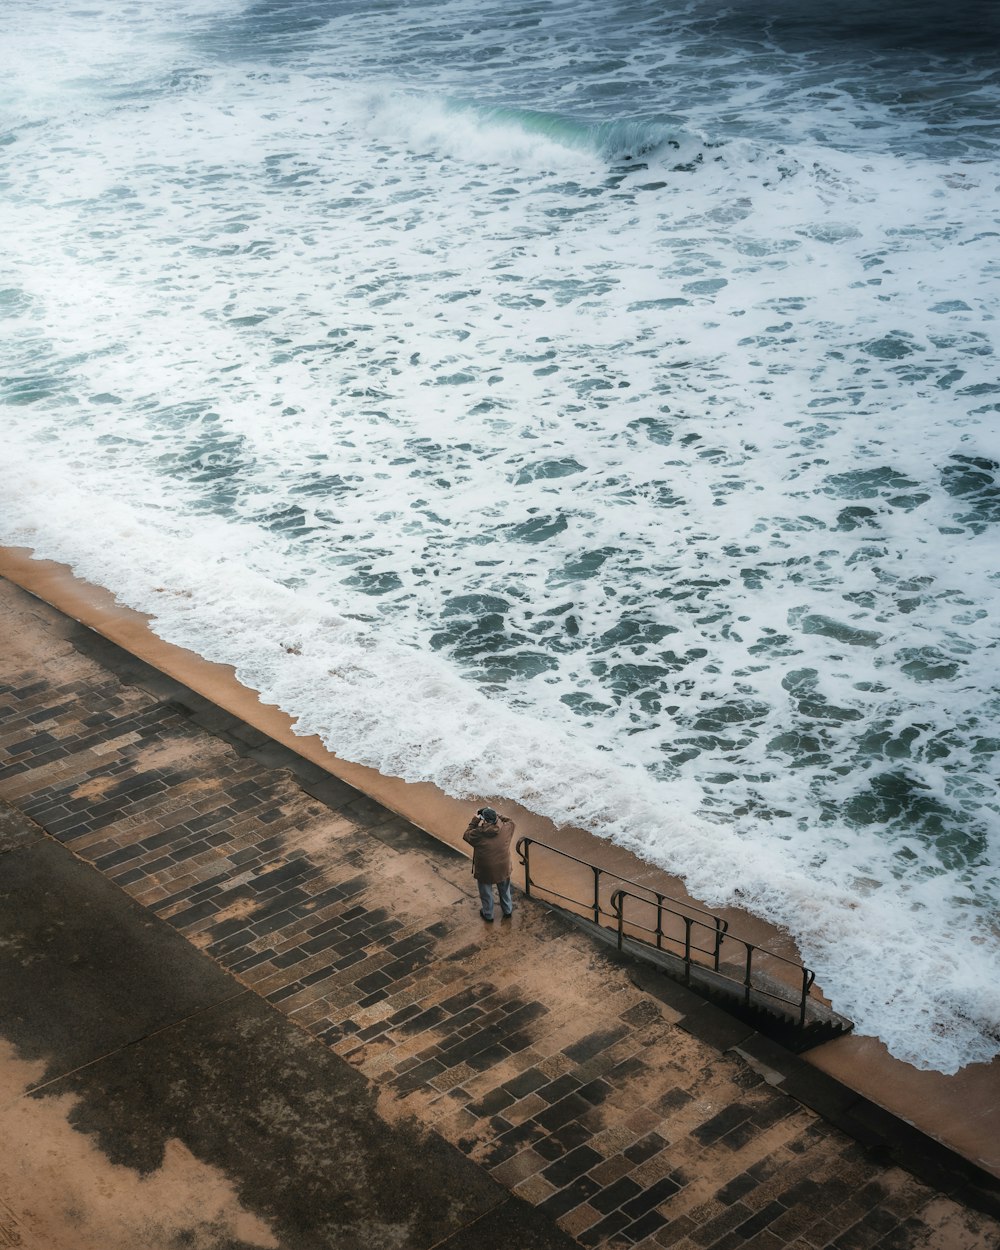 person standing on brown wooden dock near ocean waves during daytime